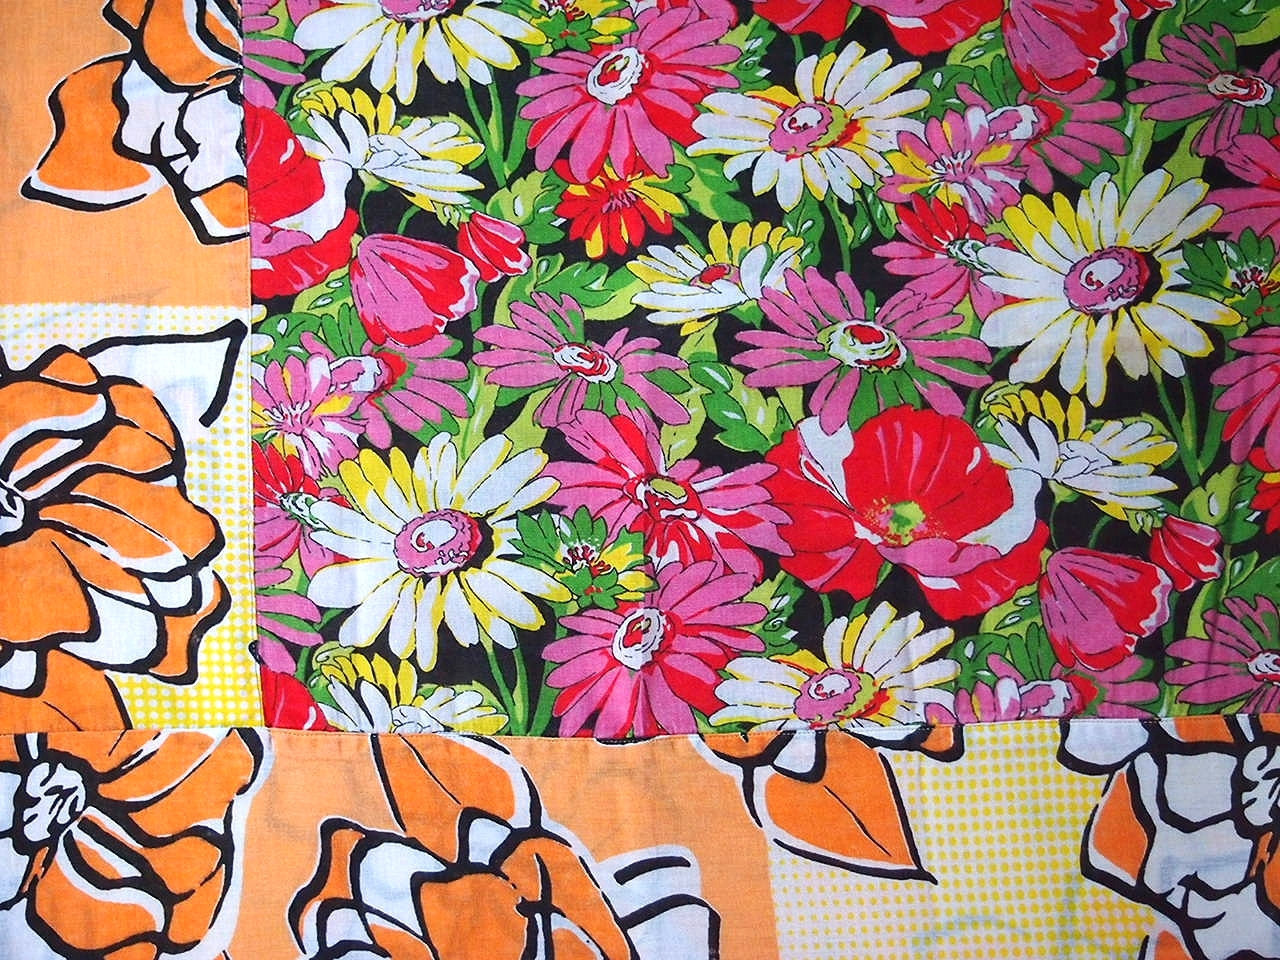 Floral Chita Tablecloth in Black, Pink and Orange - $30.00